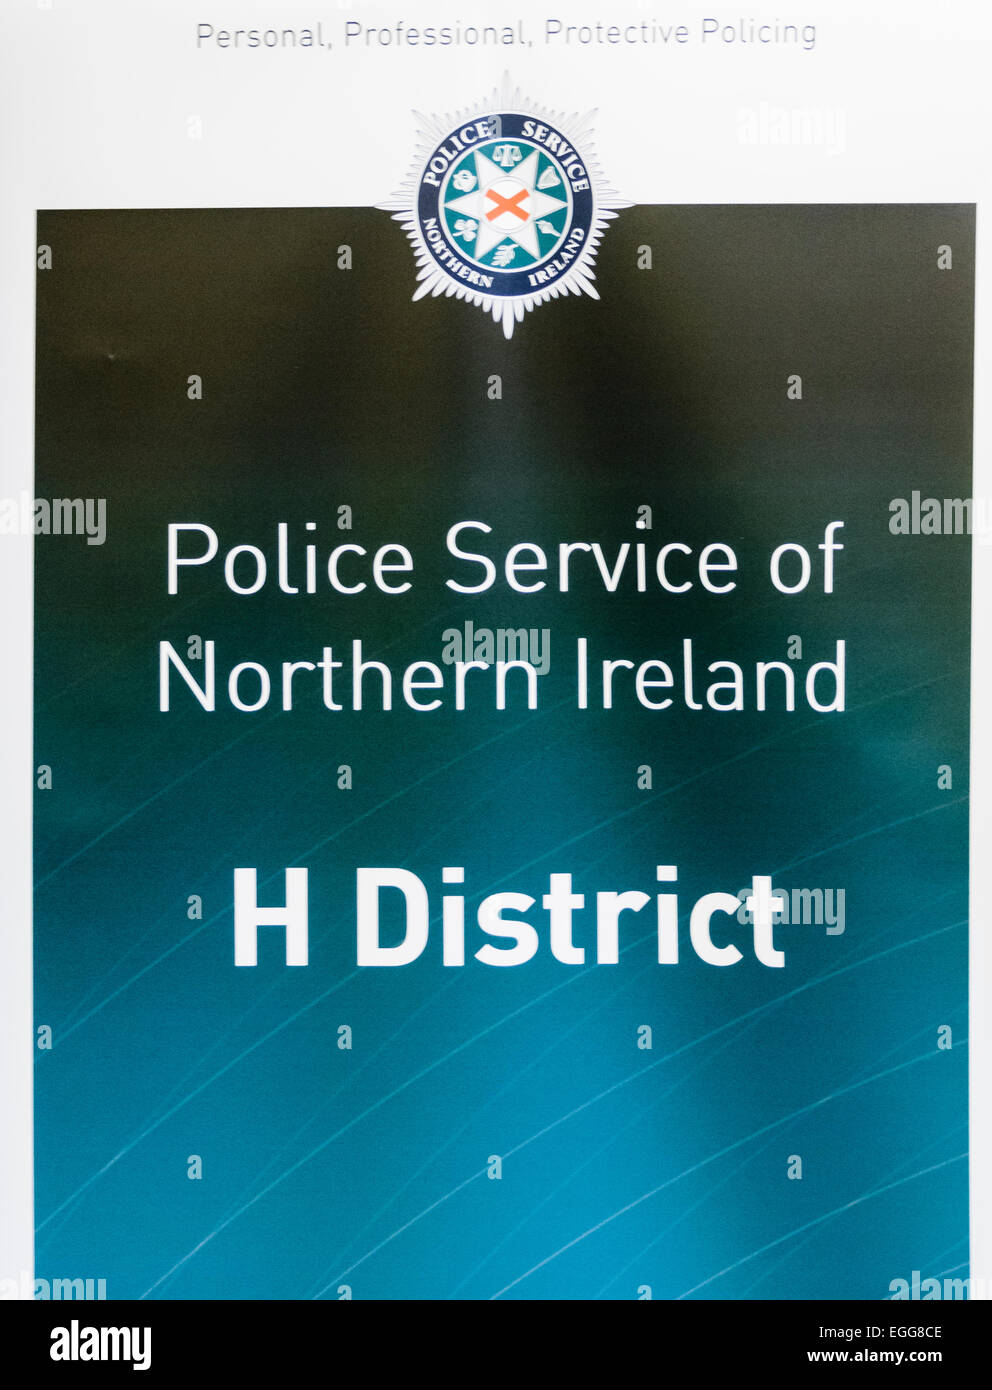 Ballymena, UK. 02/04/2012.  Sign for 'H District' at Ballymena Police Station, Northern Ireland.  H District encompasses most of County Antrim. Stock Photo